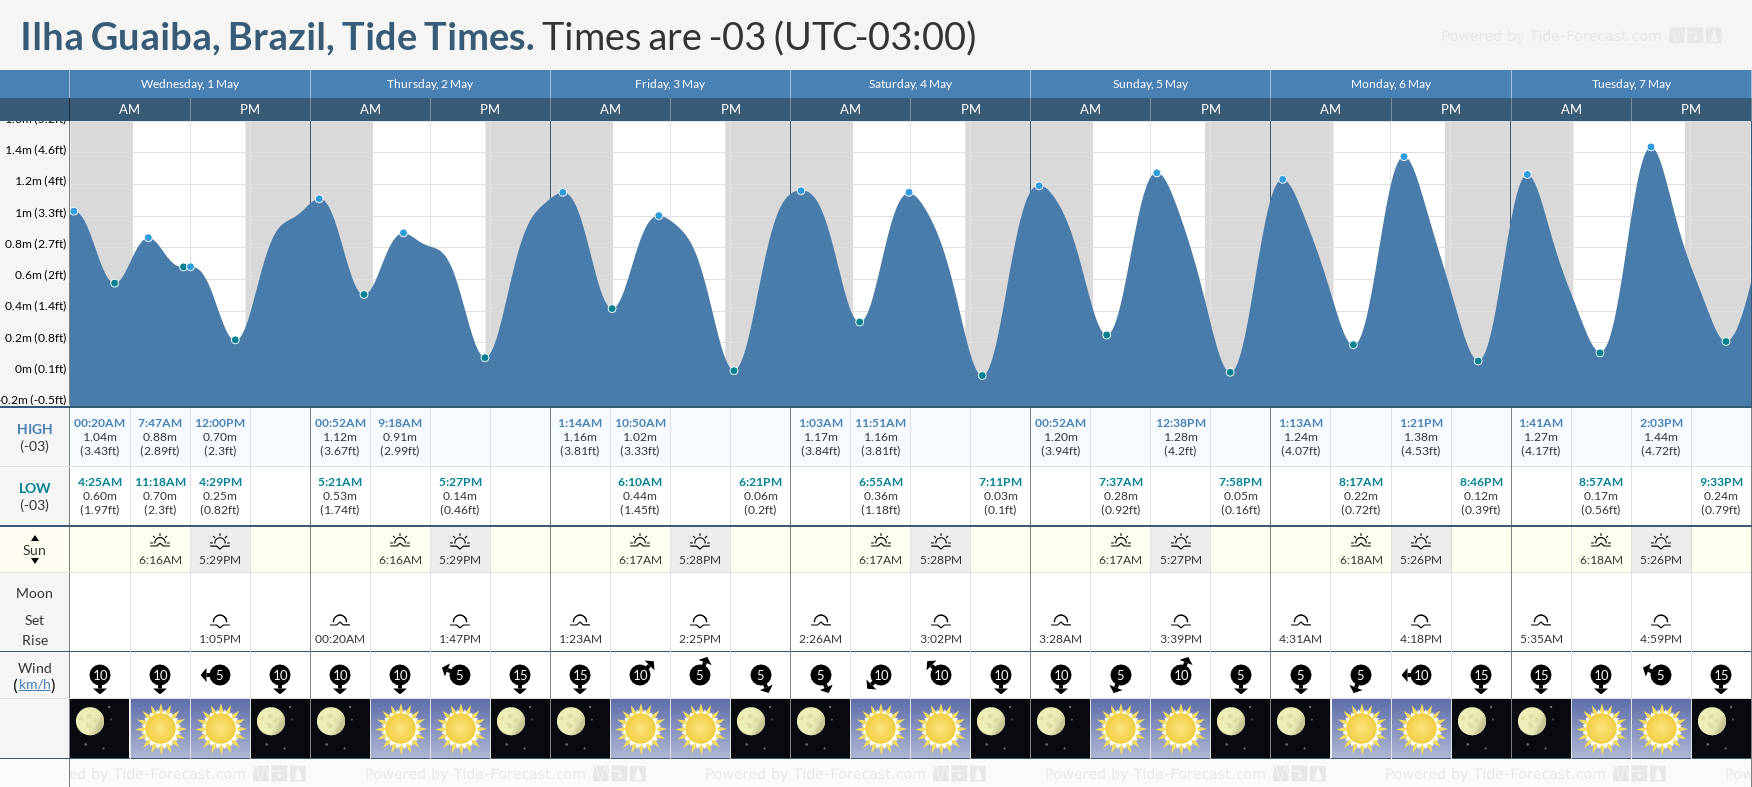 Ilha Guaiba, Brazil Tide Chart including high and low tide times for the next 7 days